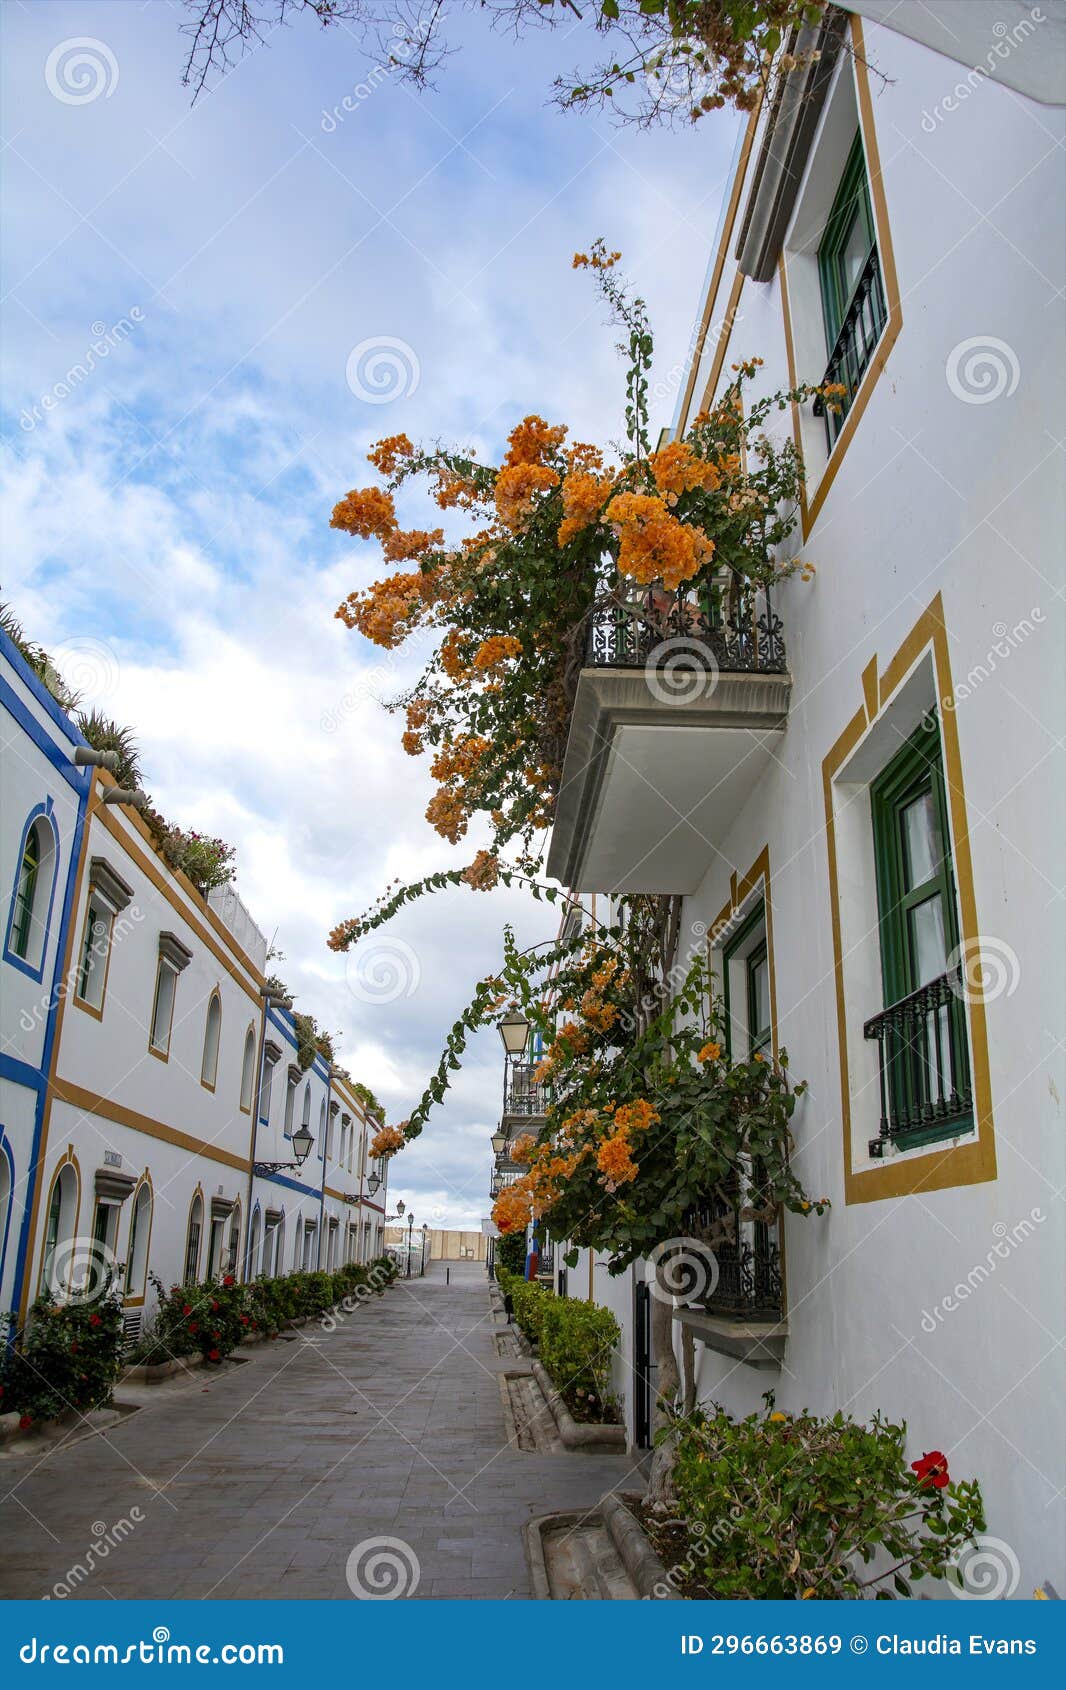 houses with flowers in the spanish town of puerto de mogÃÂ¡n